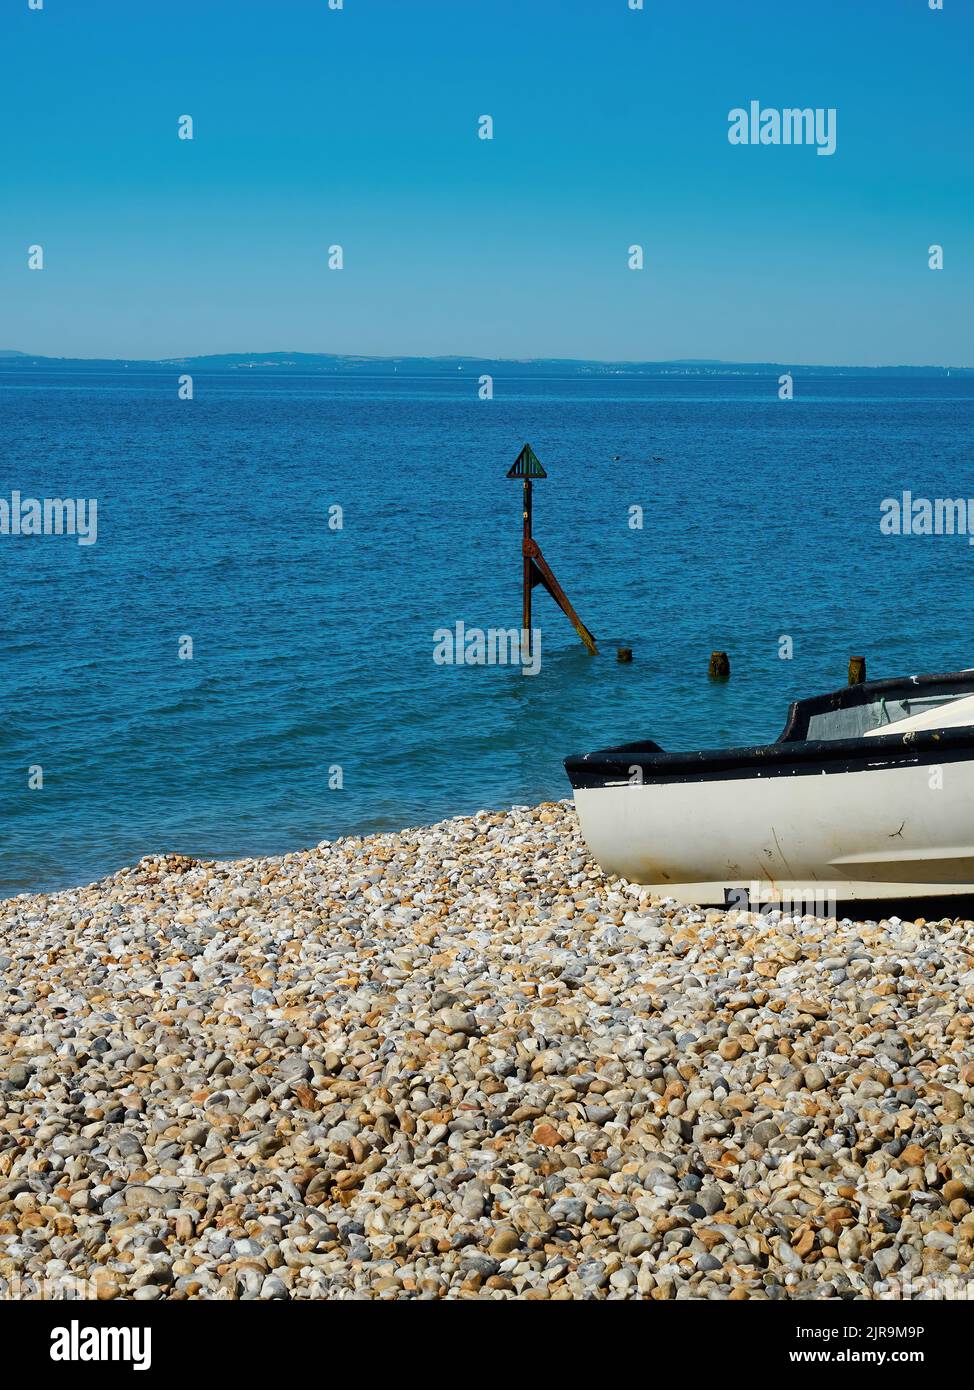 A small boat pulled onto a deserted shingle beach near a marker buoy and a rippled blue sea, under a clear summer sky. Stock Photo